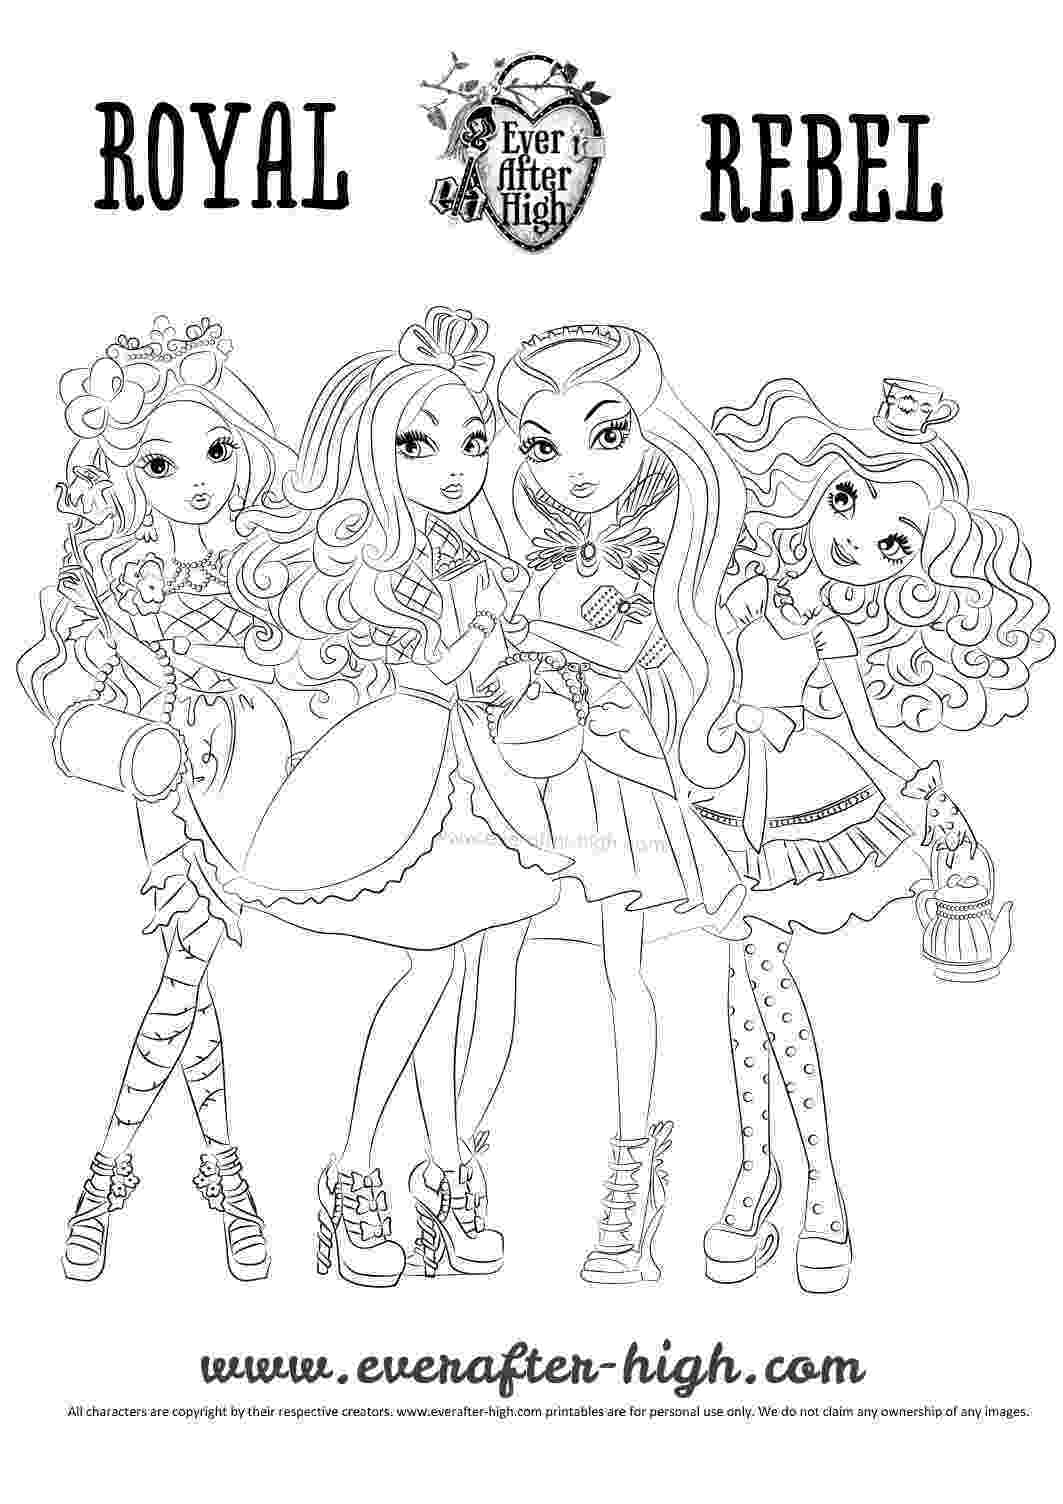 ever after high coloring book die 13 besten bilder von ever after high malvorlagen after coloring high ever book 